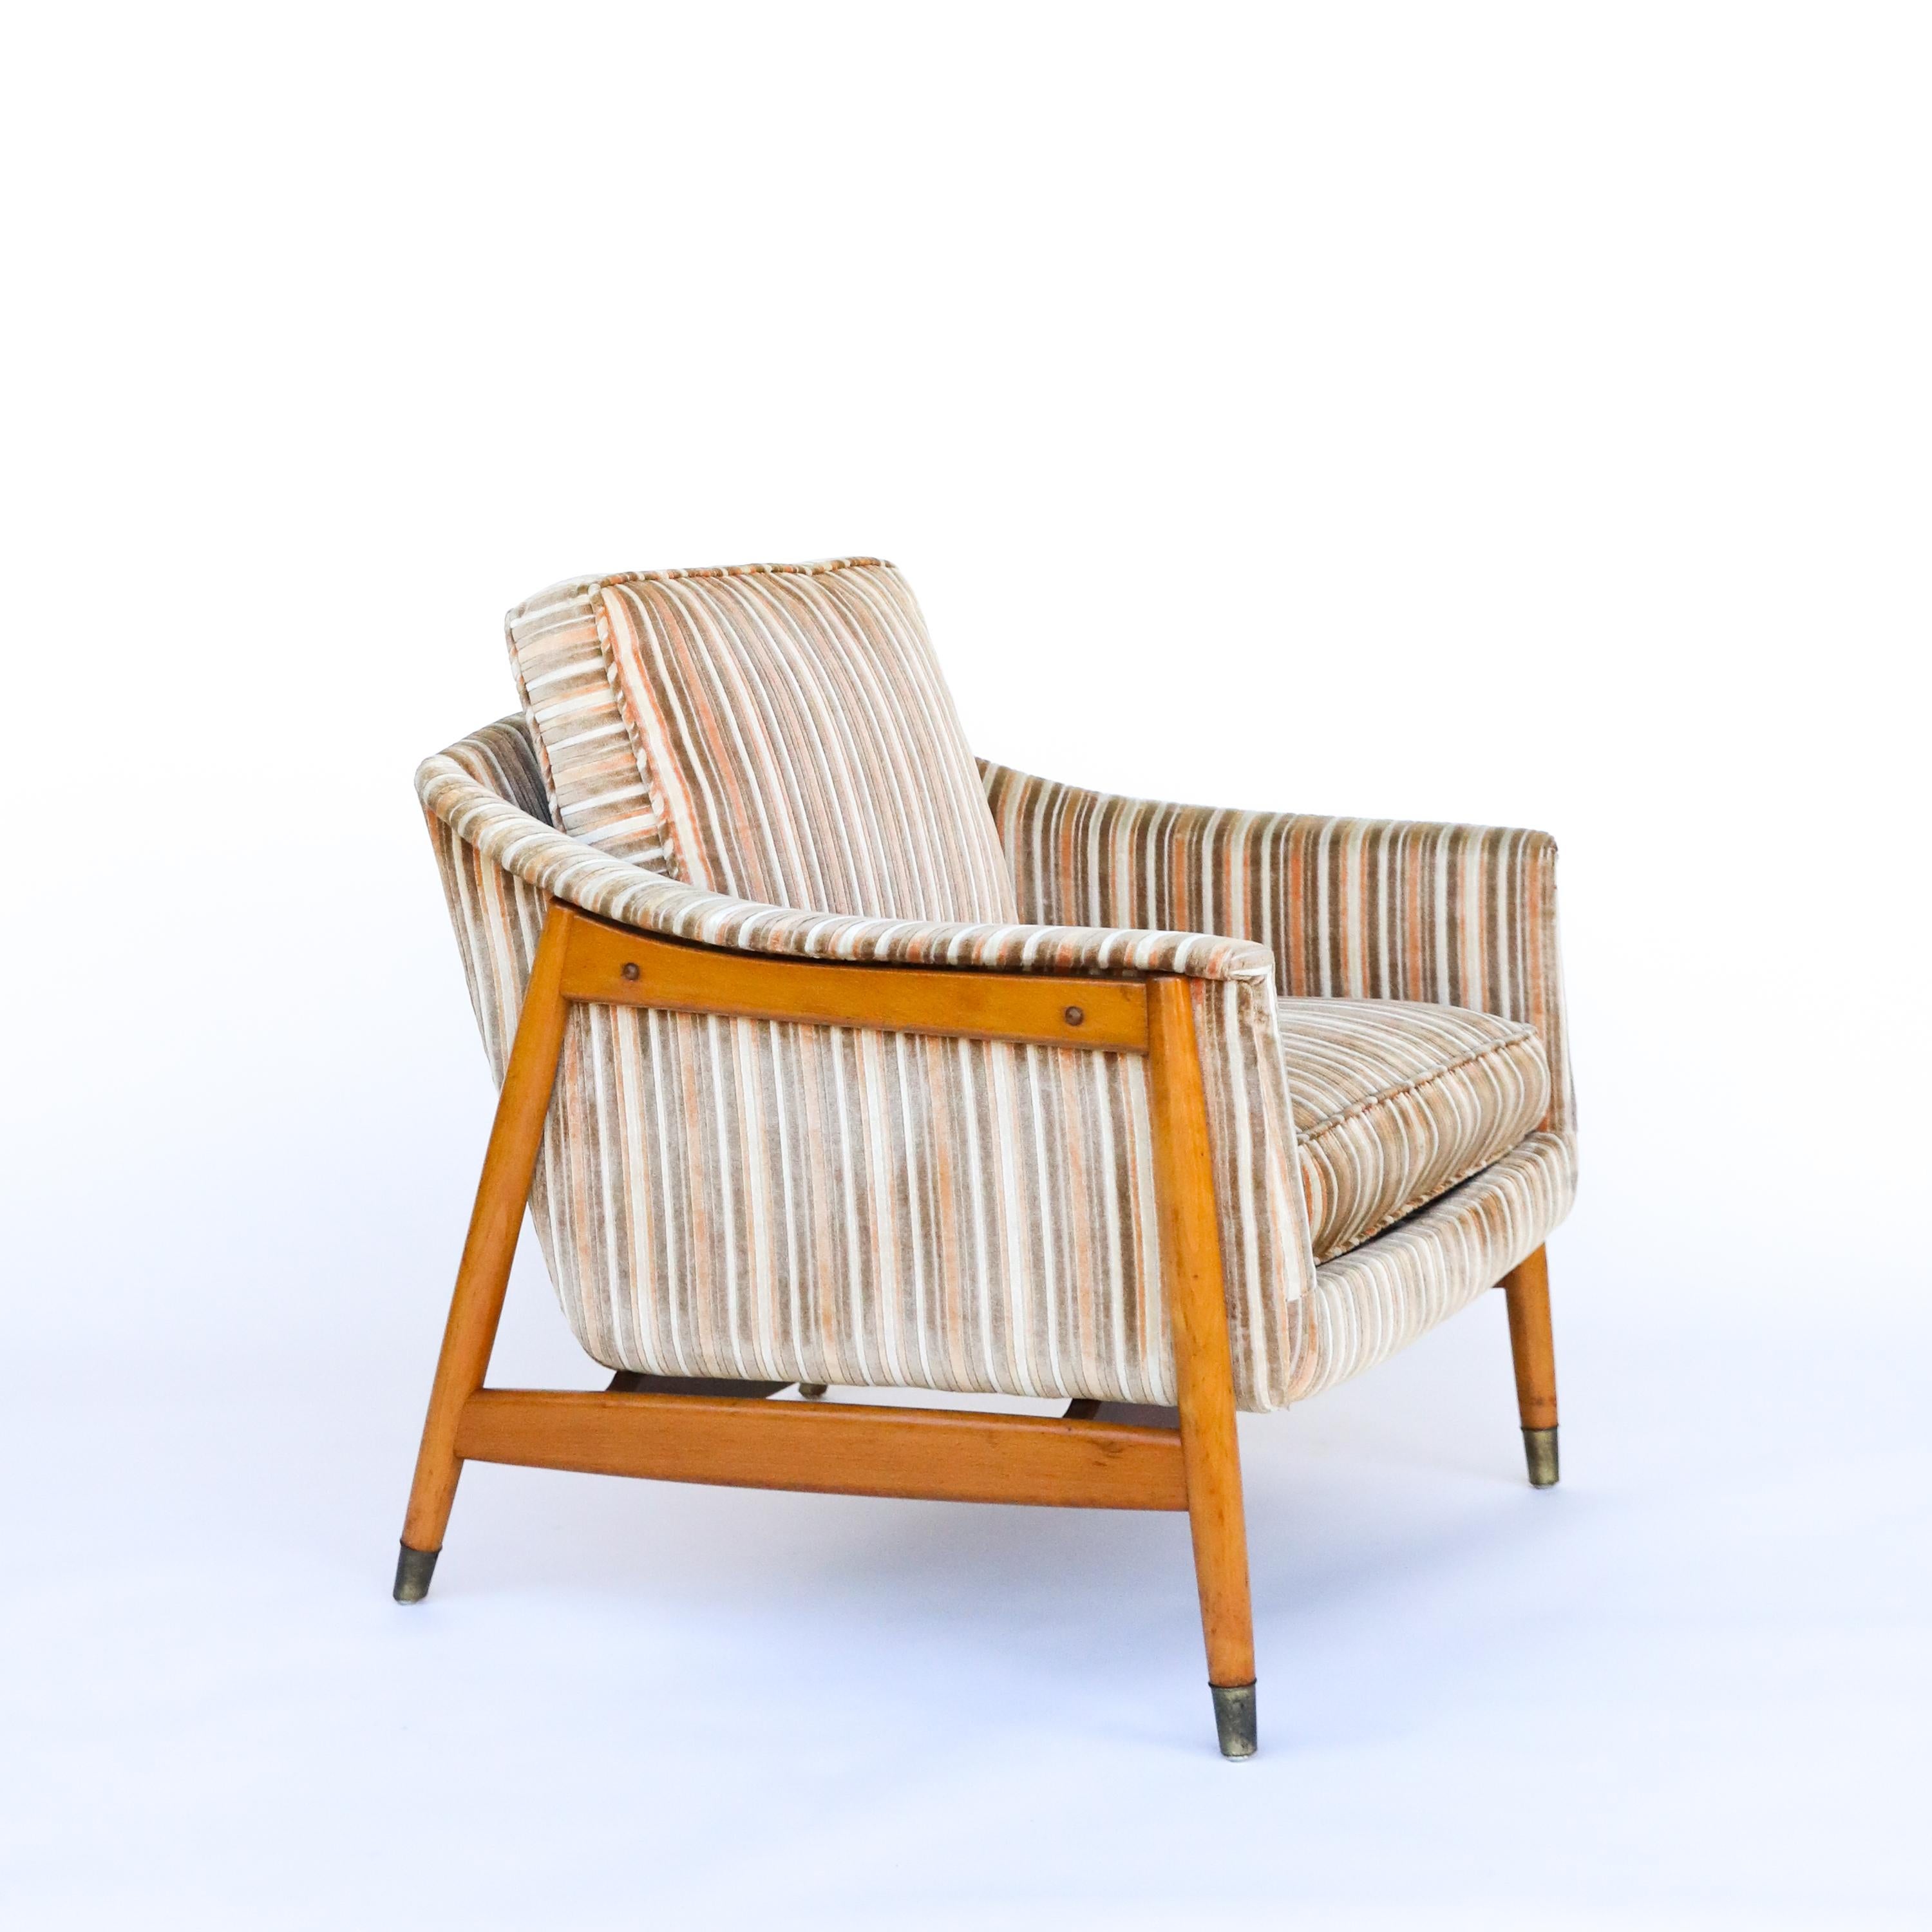 Mid-20th Century Danish Lounge Chair by Folks Ohlsson for DUX